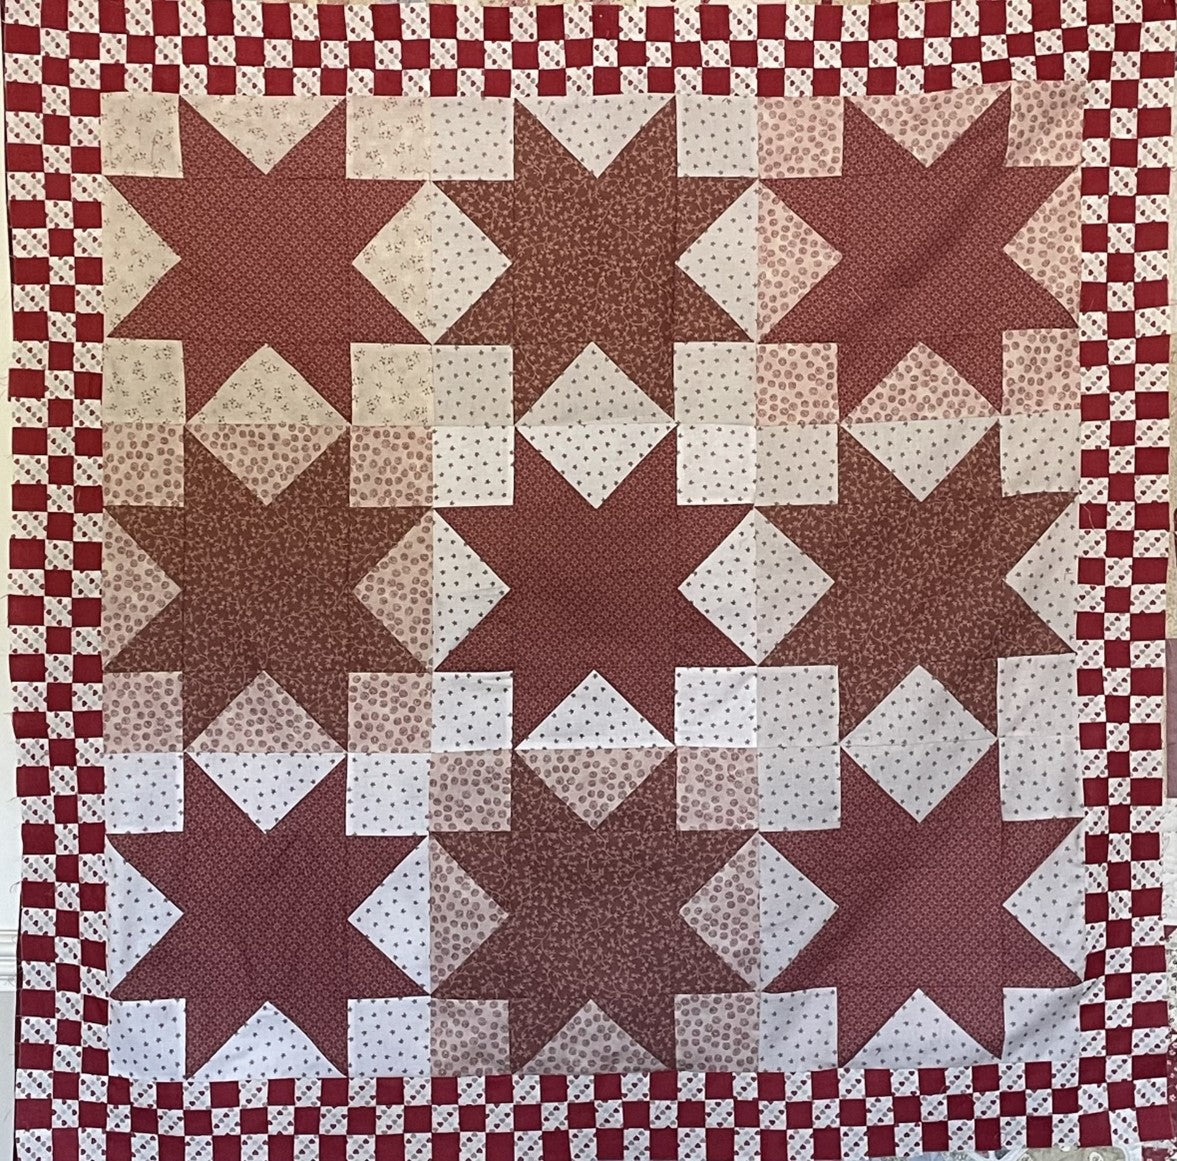 Finished Quilt Sample - Sawtooth Star with checkerboard border